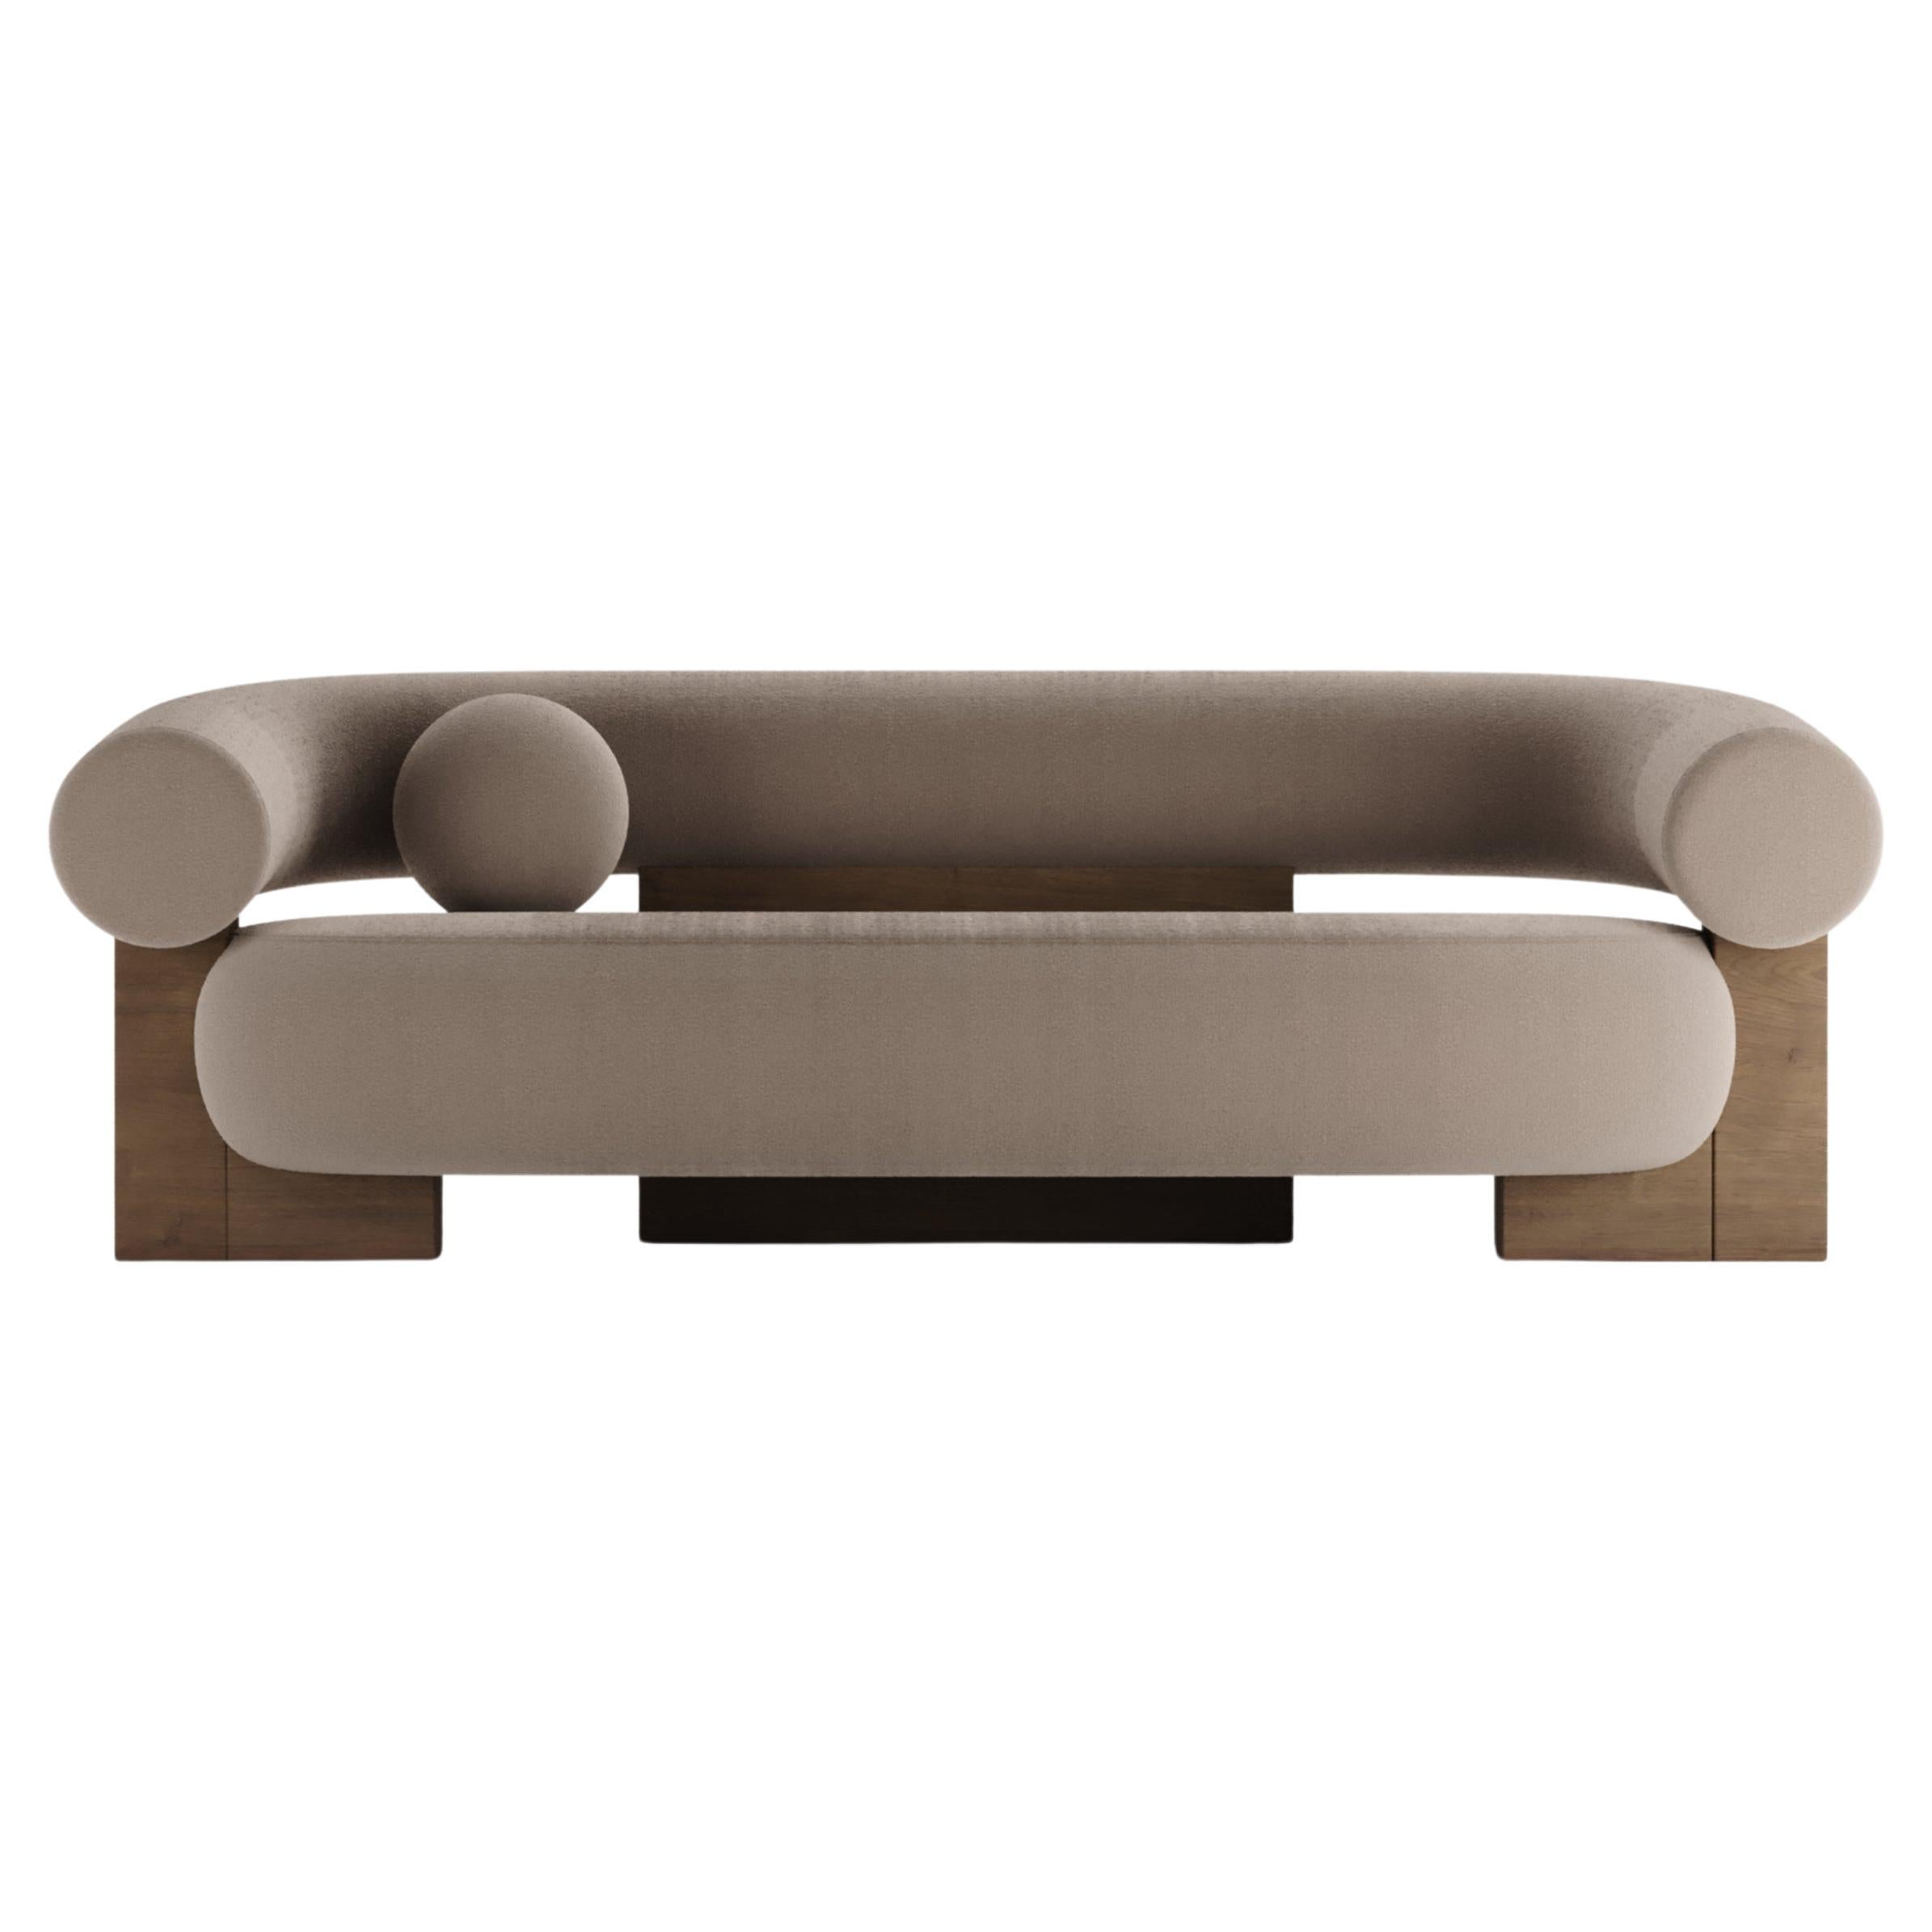 Contemporary Modern Cassete Sofa in Fabric & Wood by Collector Studio